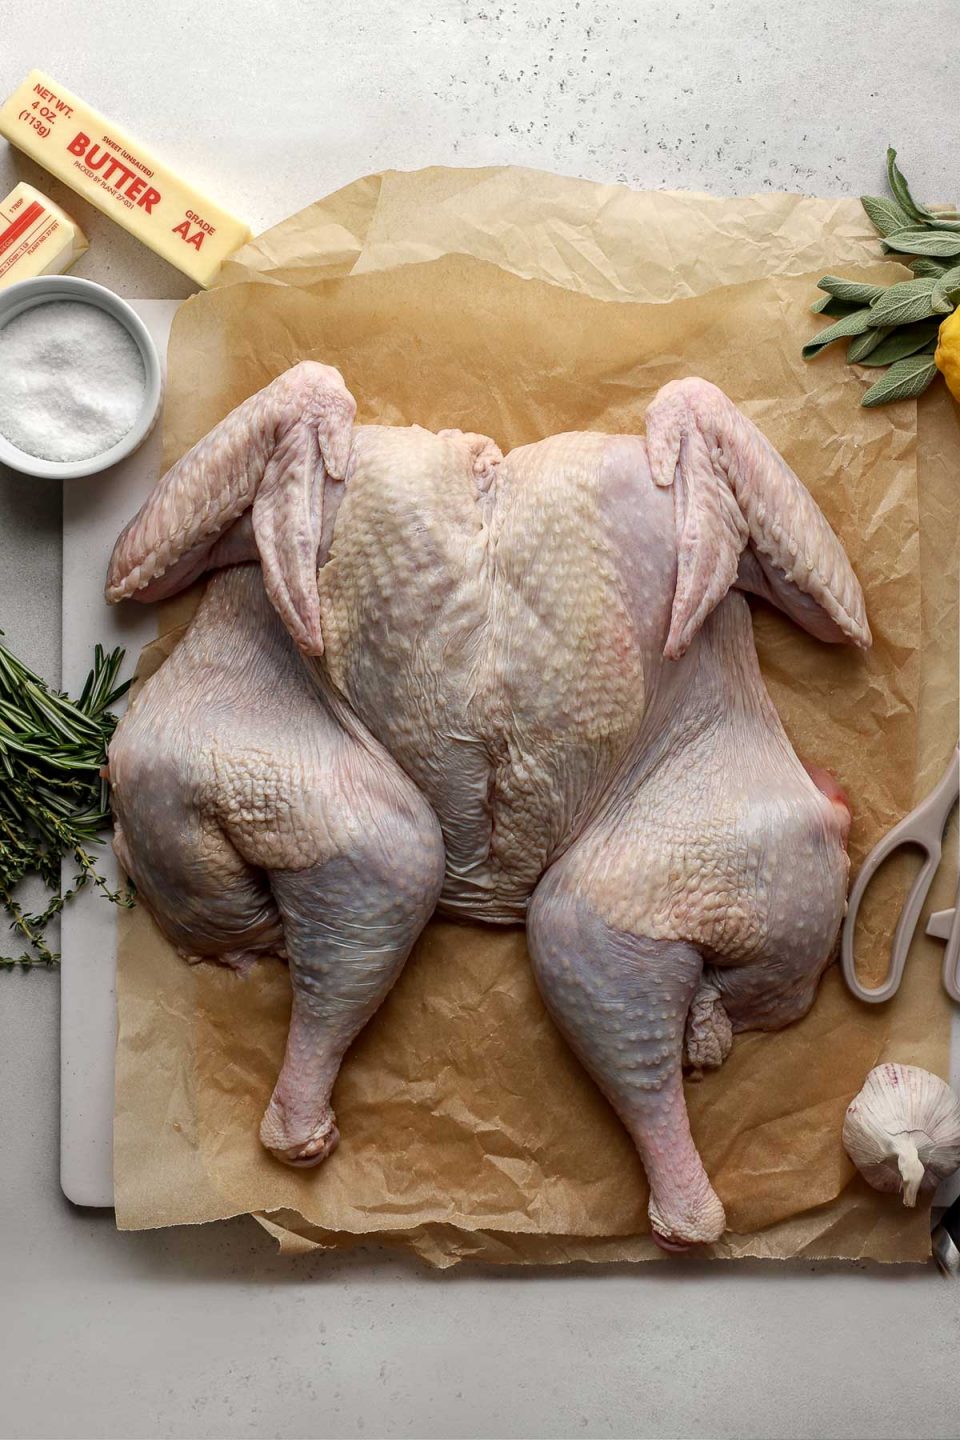 Where to Insert a Meat Thermometer in Turkey: Essential Tips